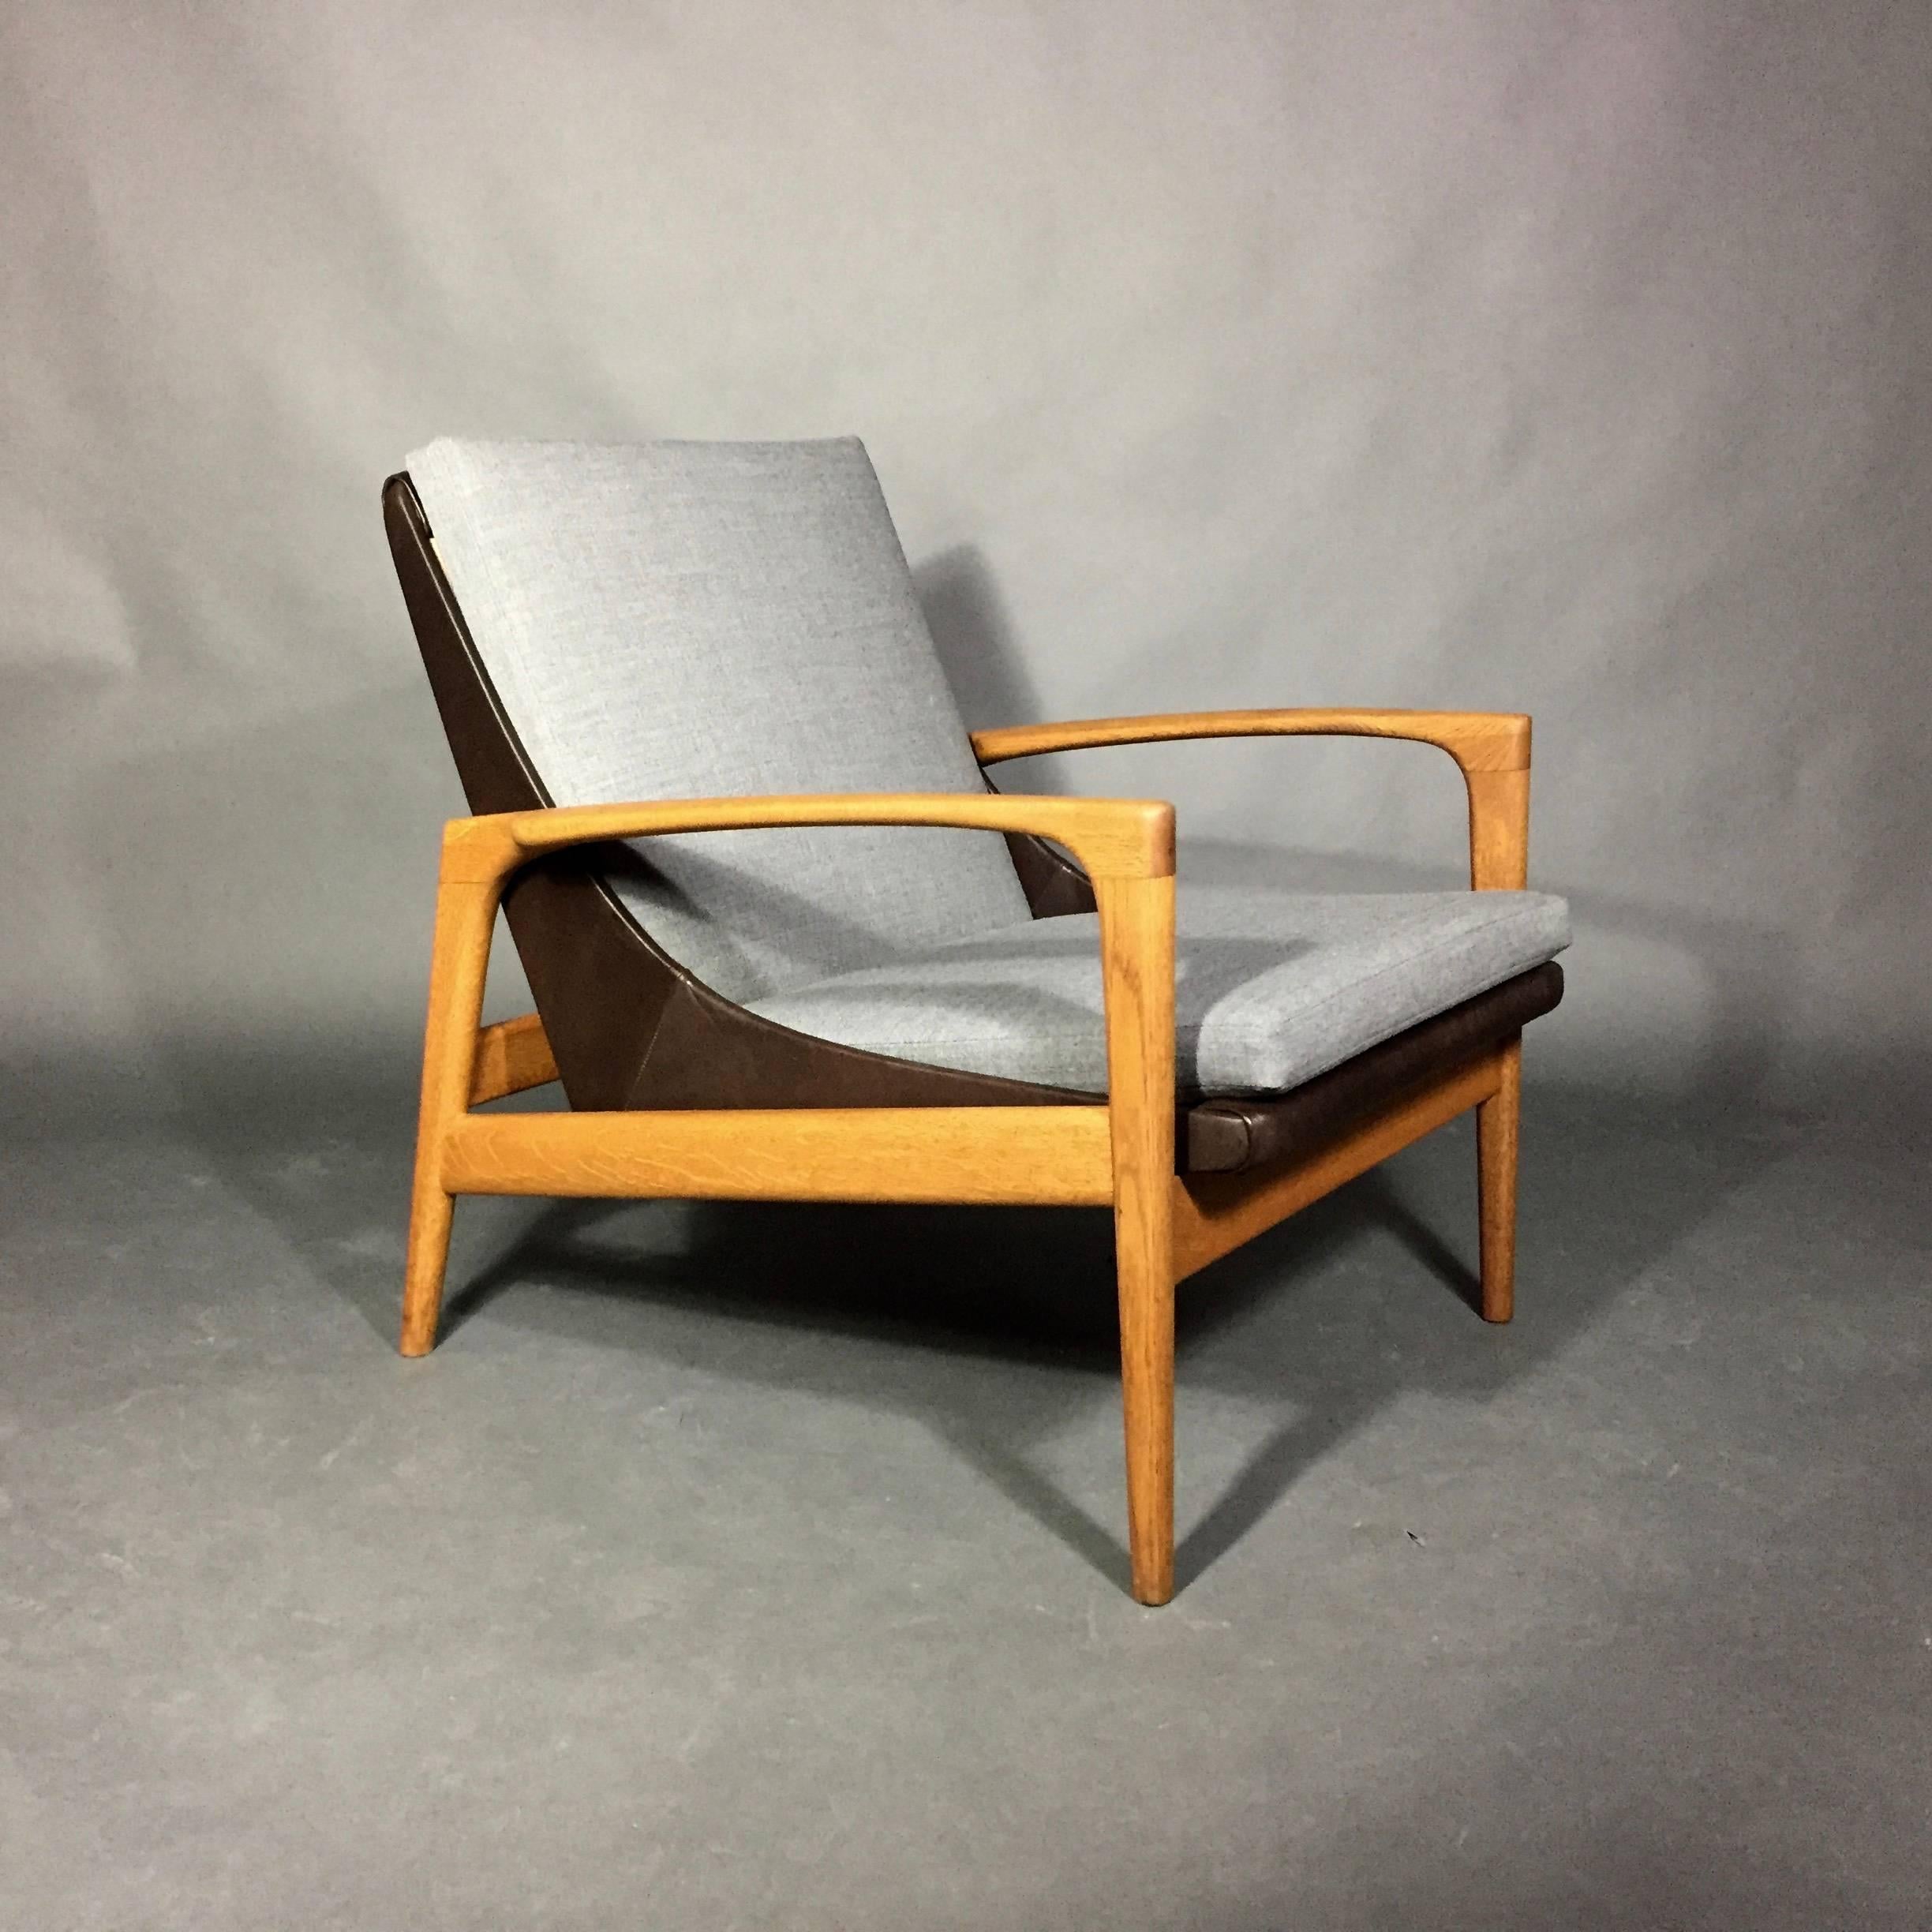 Swedish 1950s Ib Kofod-Larsen Attributed Lounge Chair, AB Trensums, Sweden For Sale